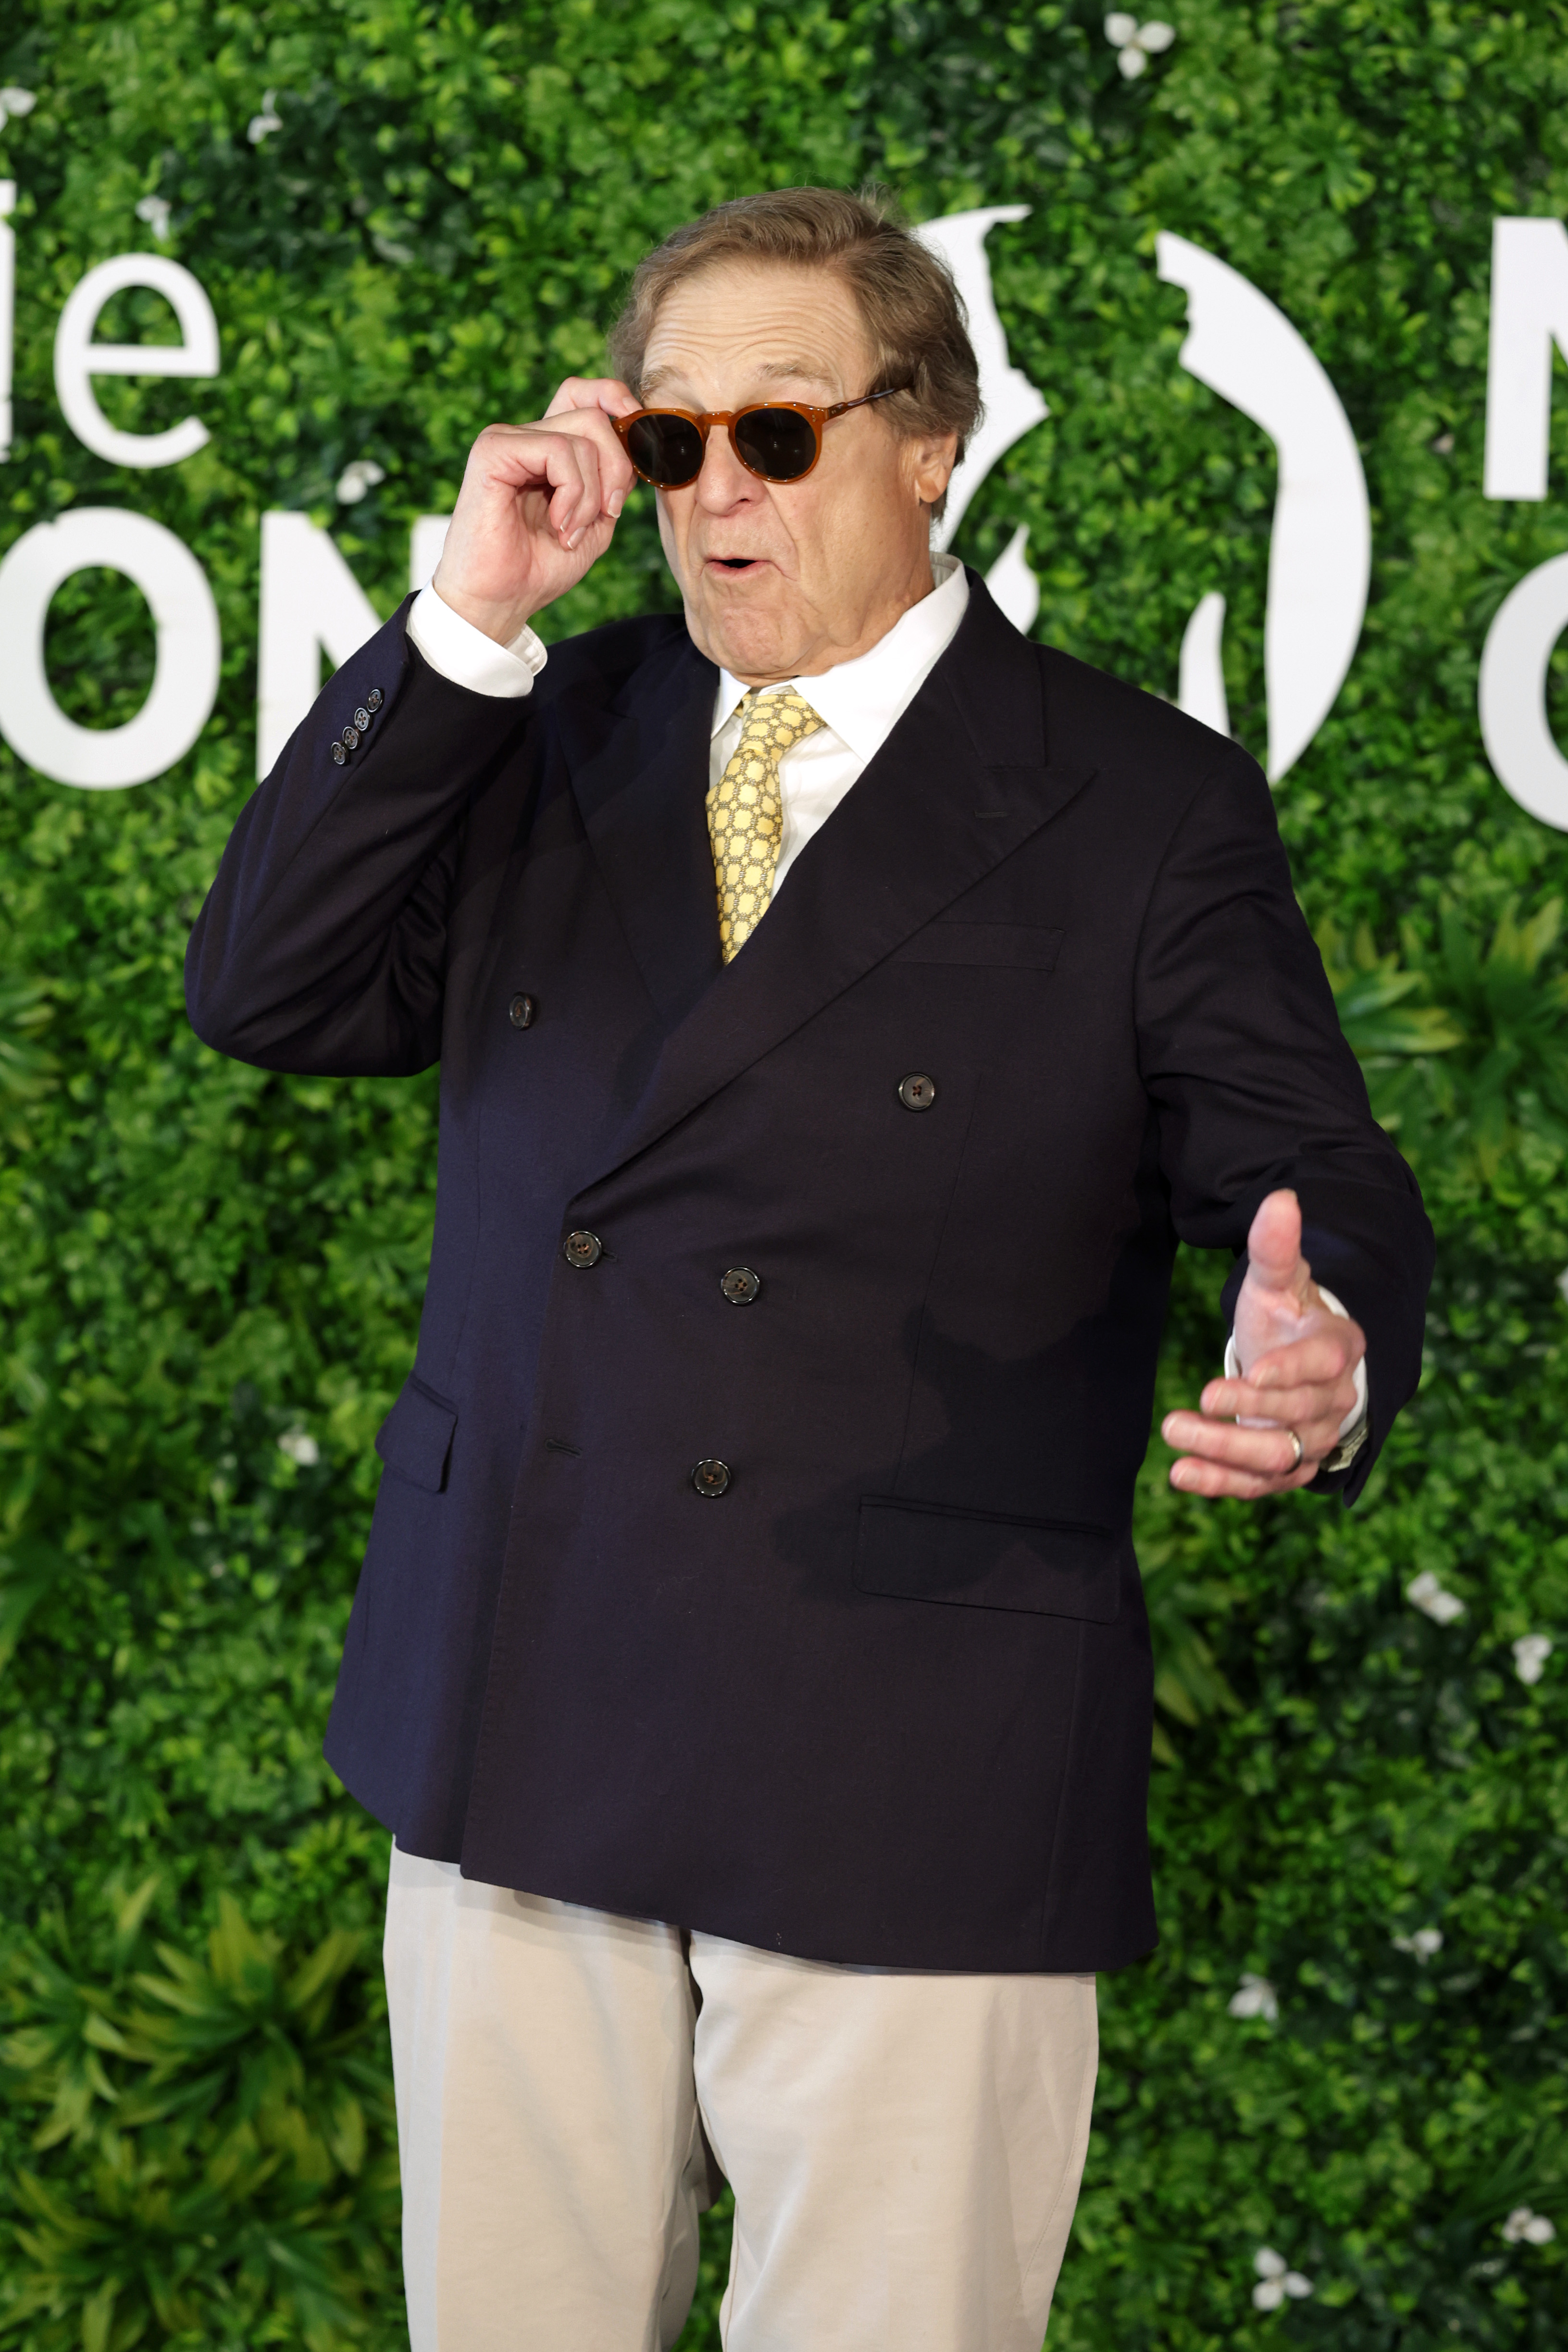 Goodman attends the "John Goodman" at  62nd Monte Carlo TV Festival in 2023 | Source: Getty Images